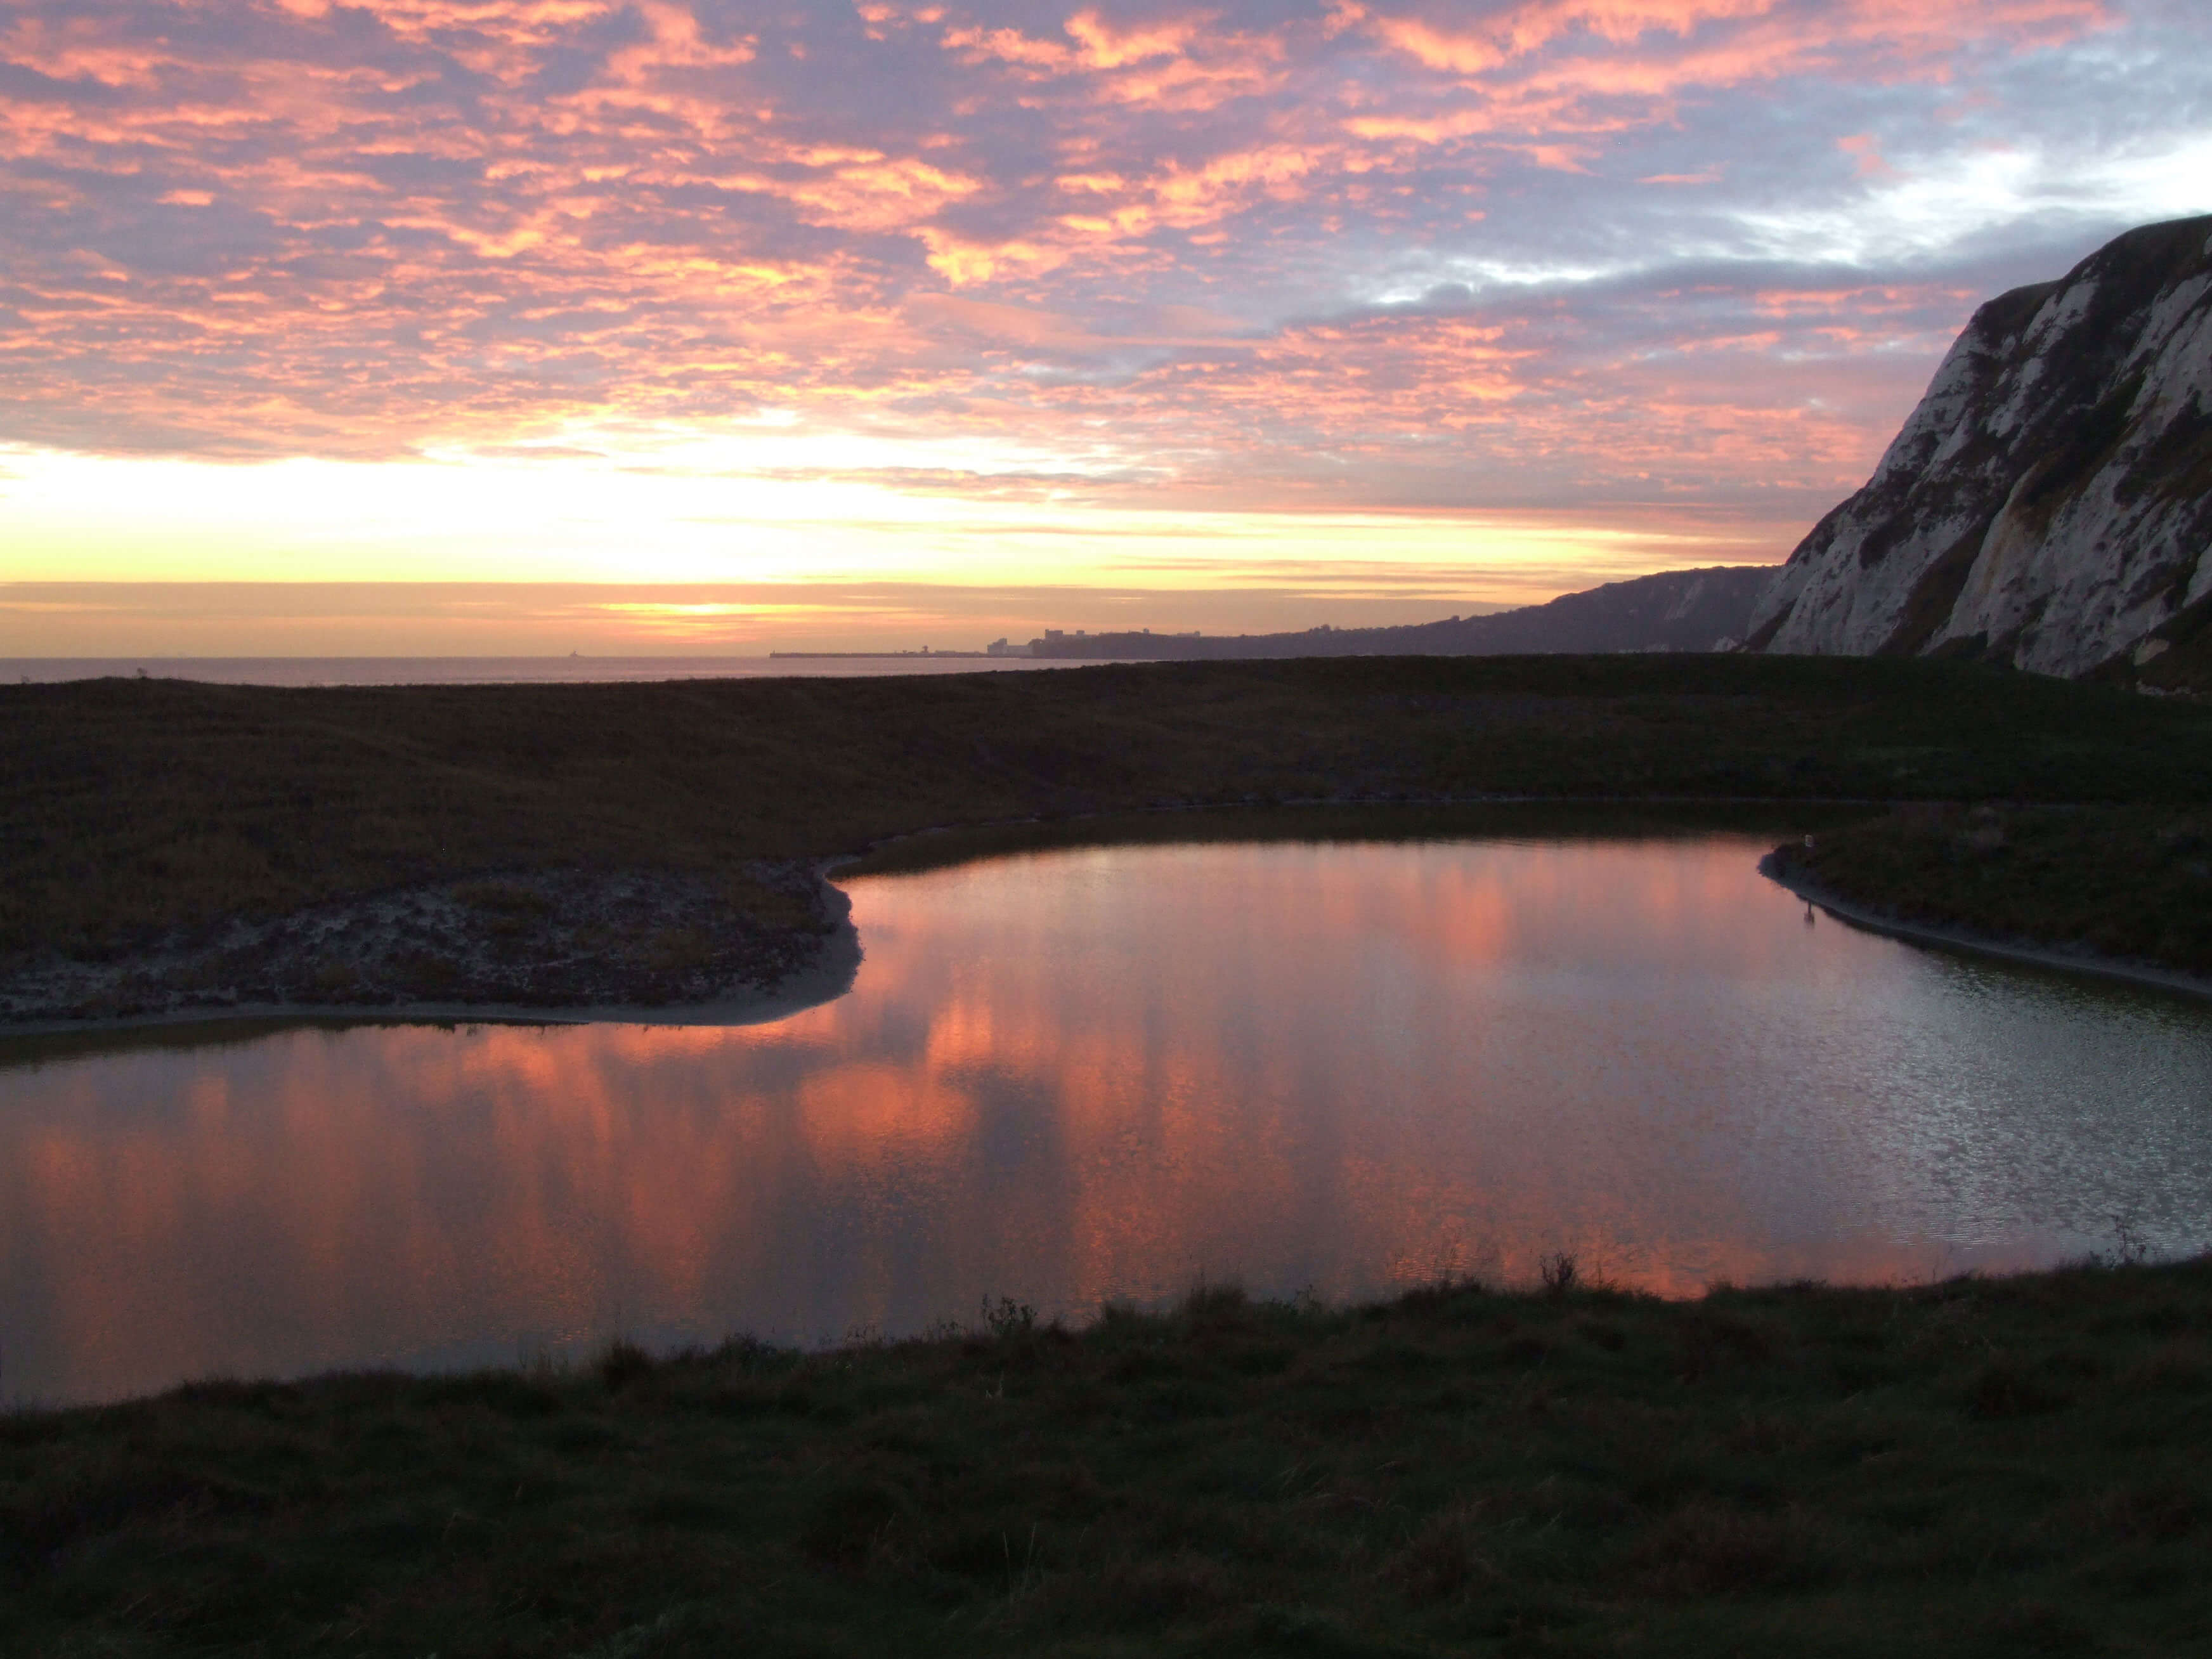 Samphire Hoe sunset view with cliffs and sea.